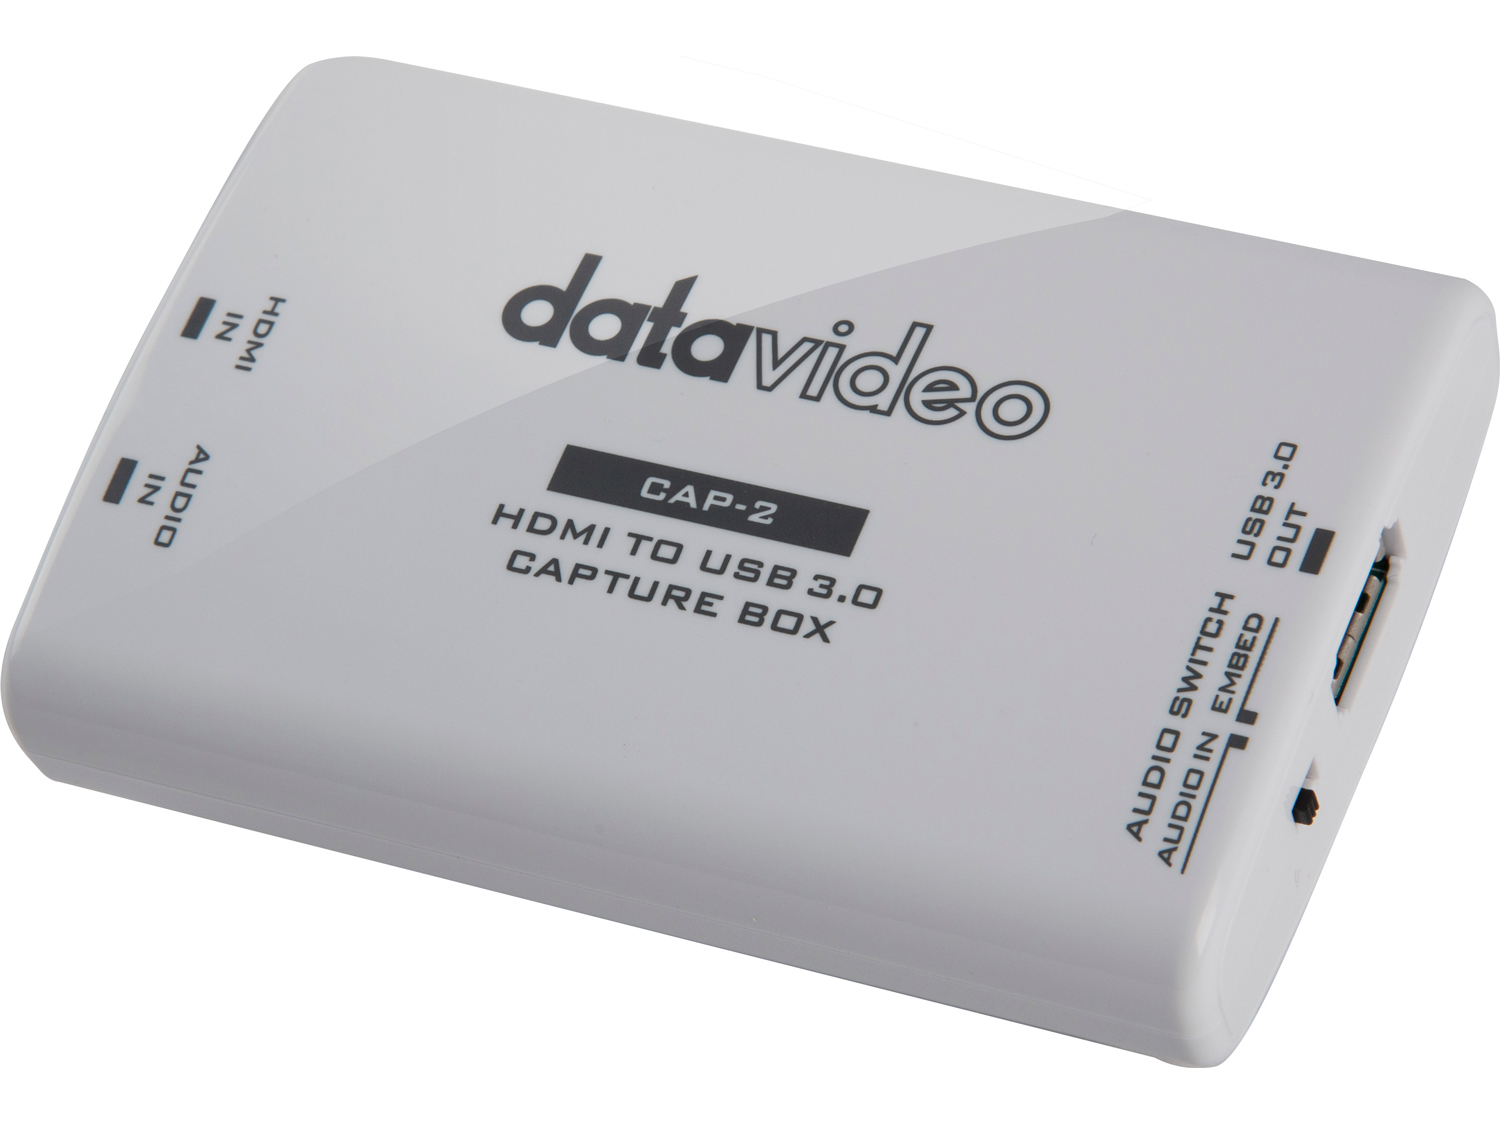 CAP-2 HDMI to USB 3.0 Capture Box/Supports up to 1080p50/60 by Datavideo